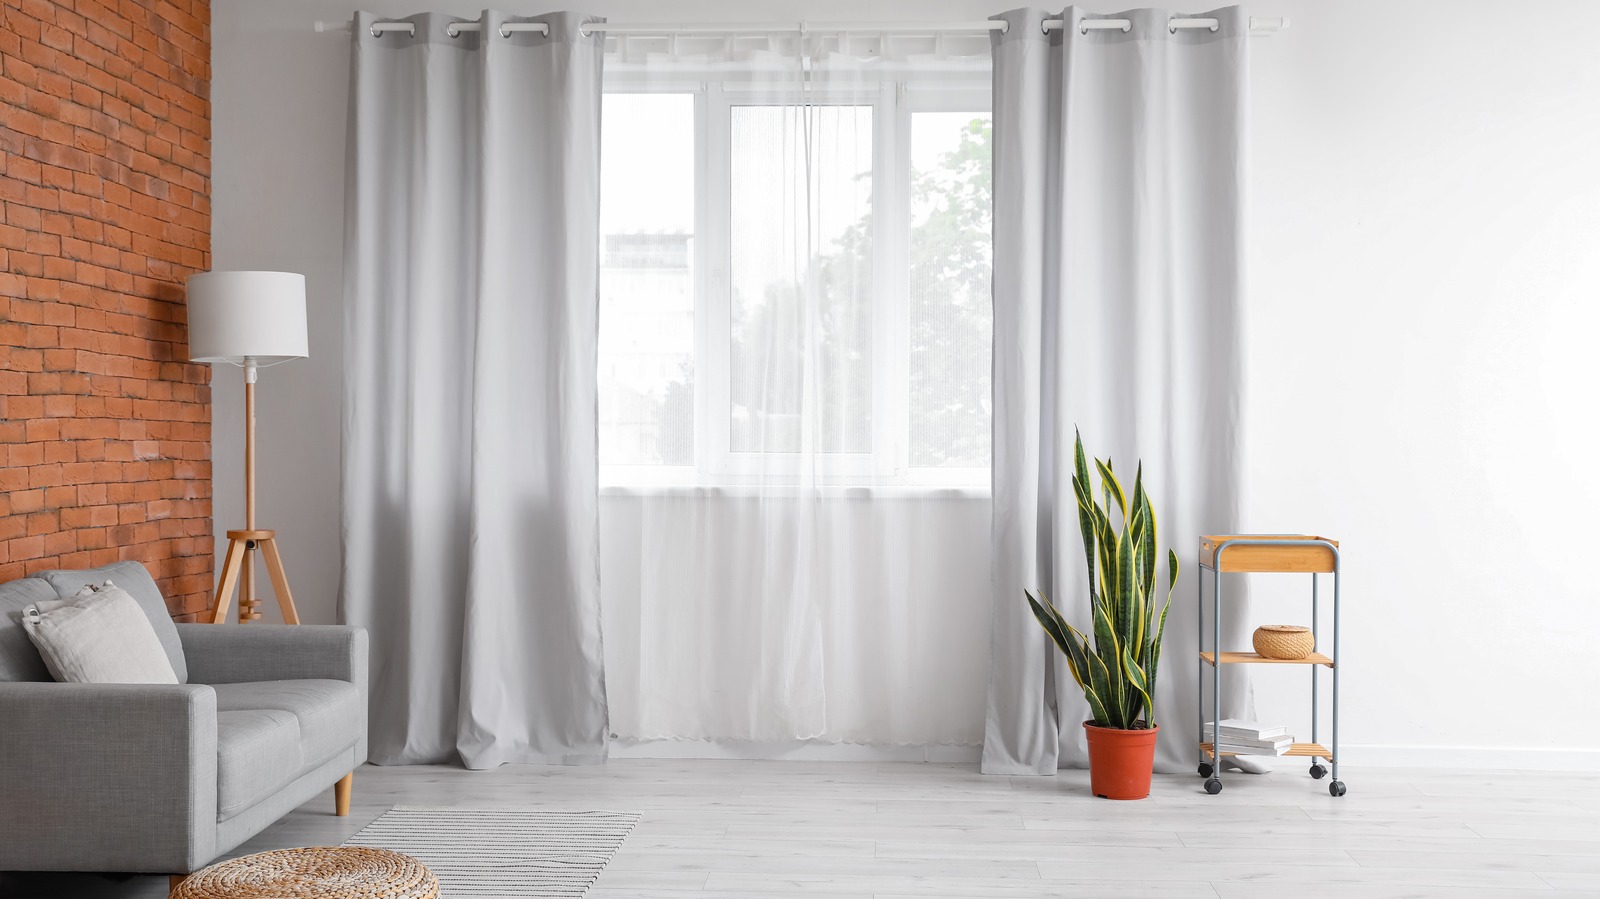 5 Tips For Choosing The Perfect Curtains For Your Space